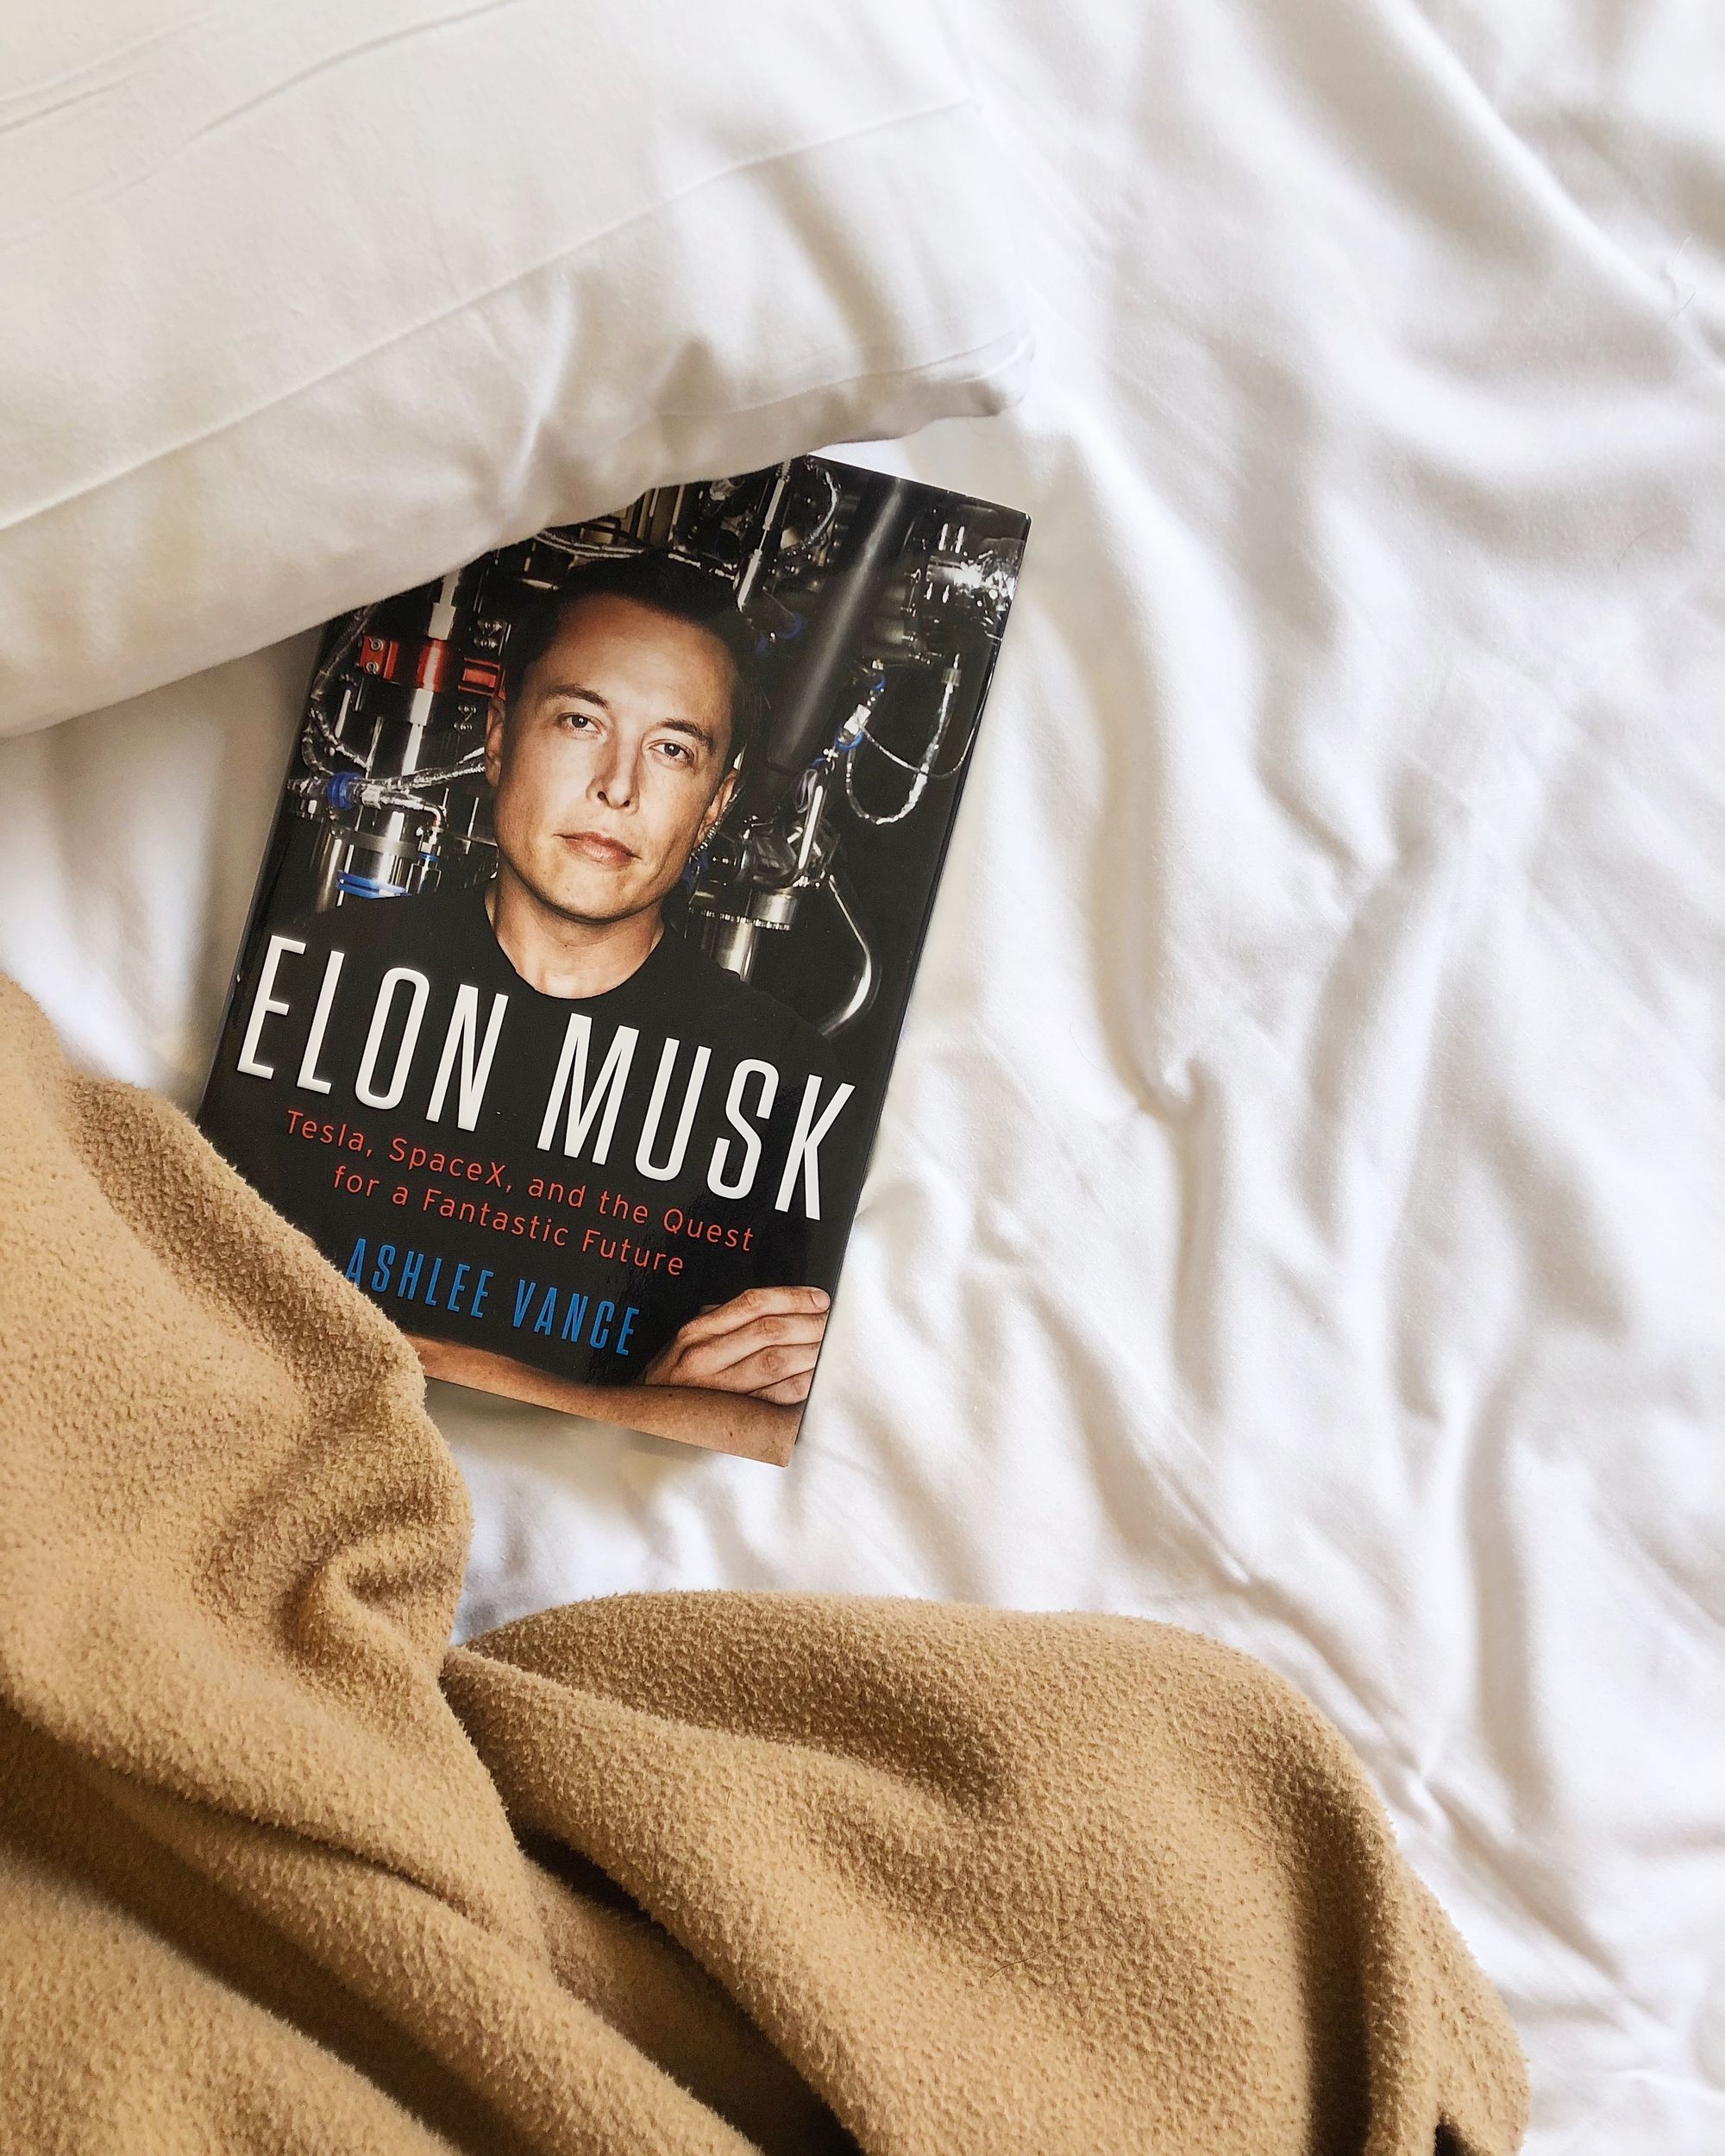 Book Notes: Elon Musk by Ashlee Vance